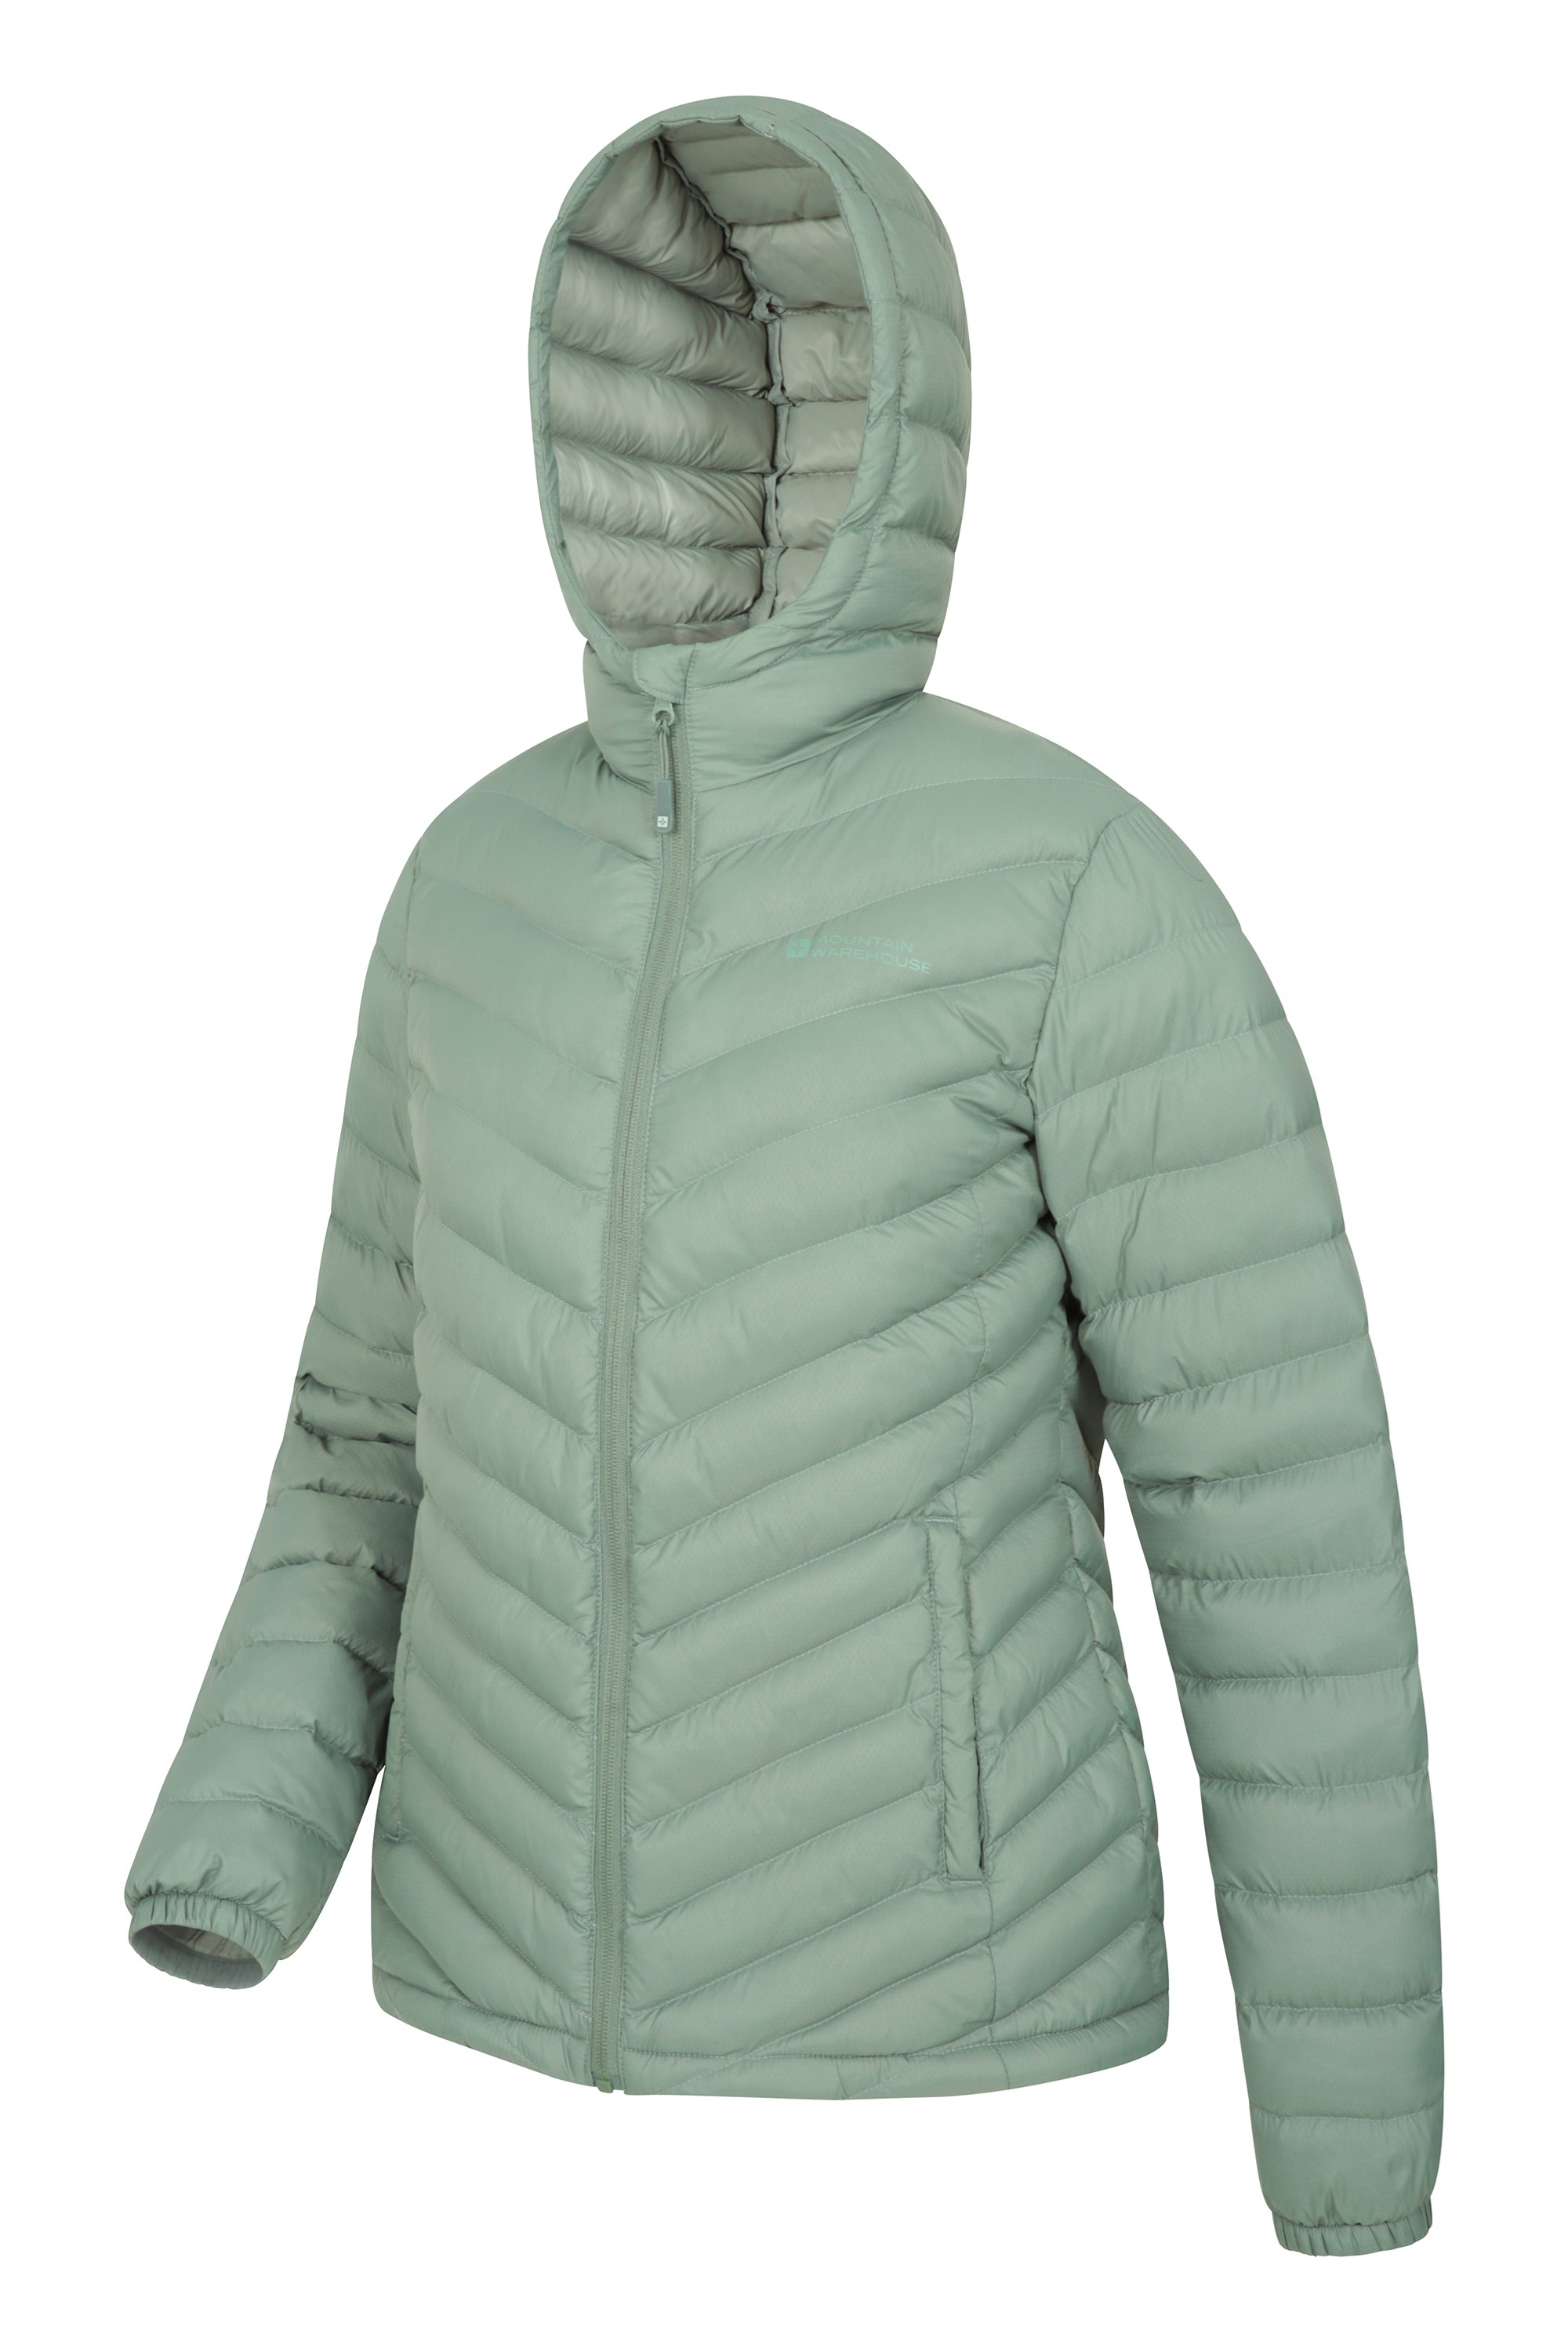 Water-Resistant Fabric Mountain Warehouse Printed Seasons Boys Padded Winter Jacket Lightweight Microfiber Filling for Warm with Elasticised Cuffs /& Two Front Pockets